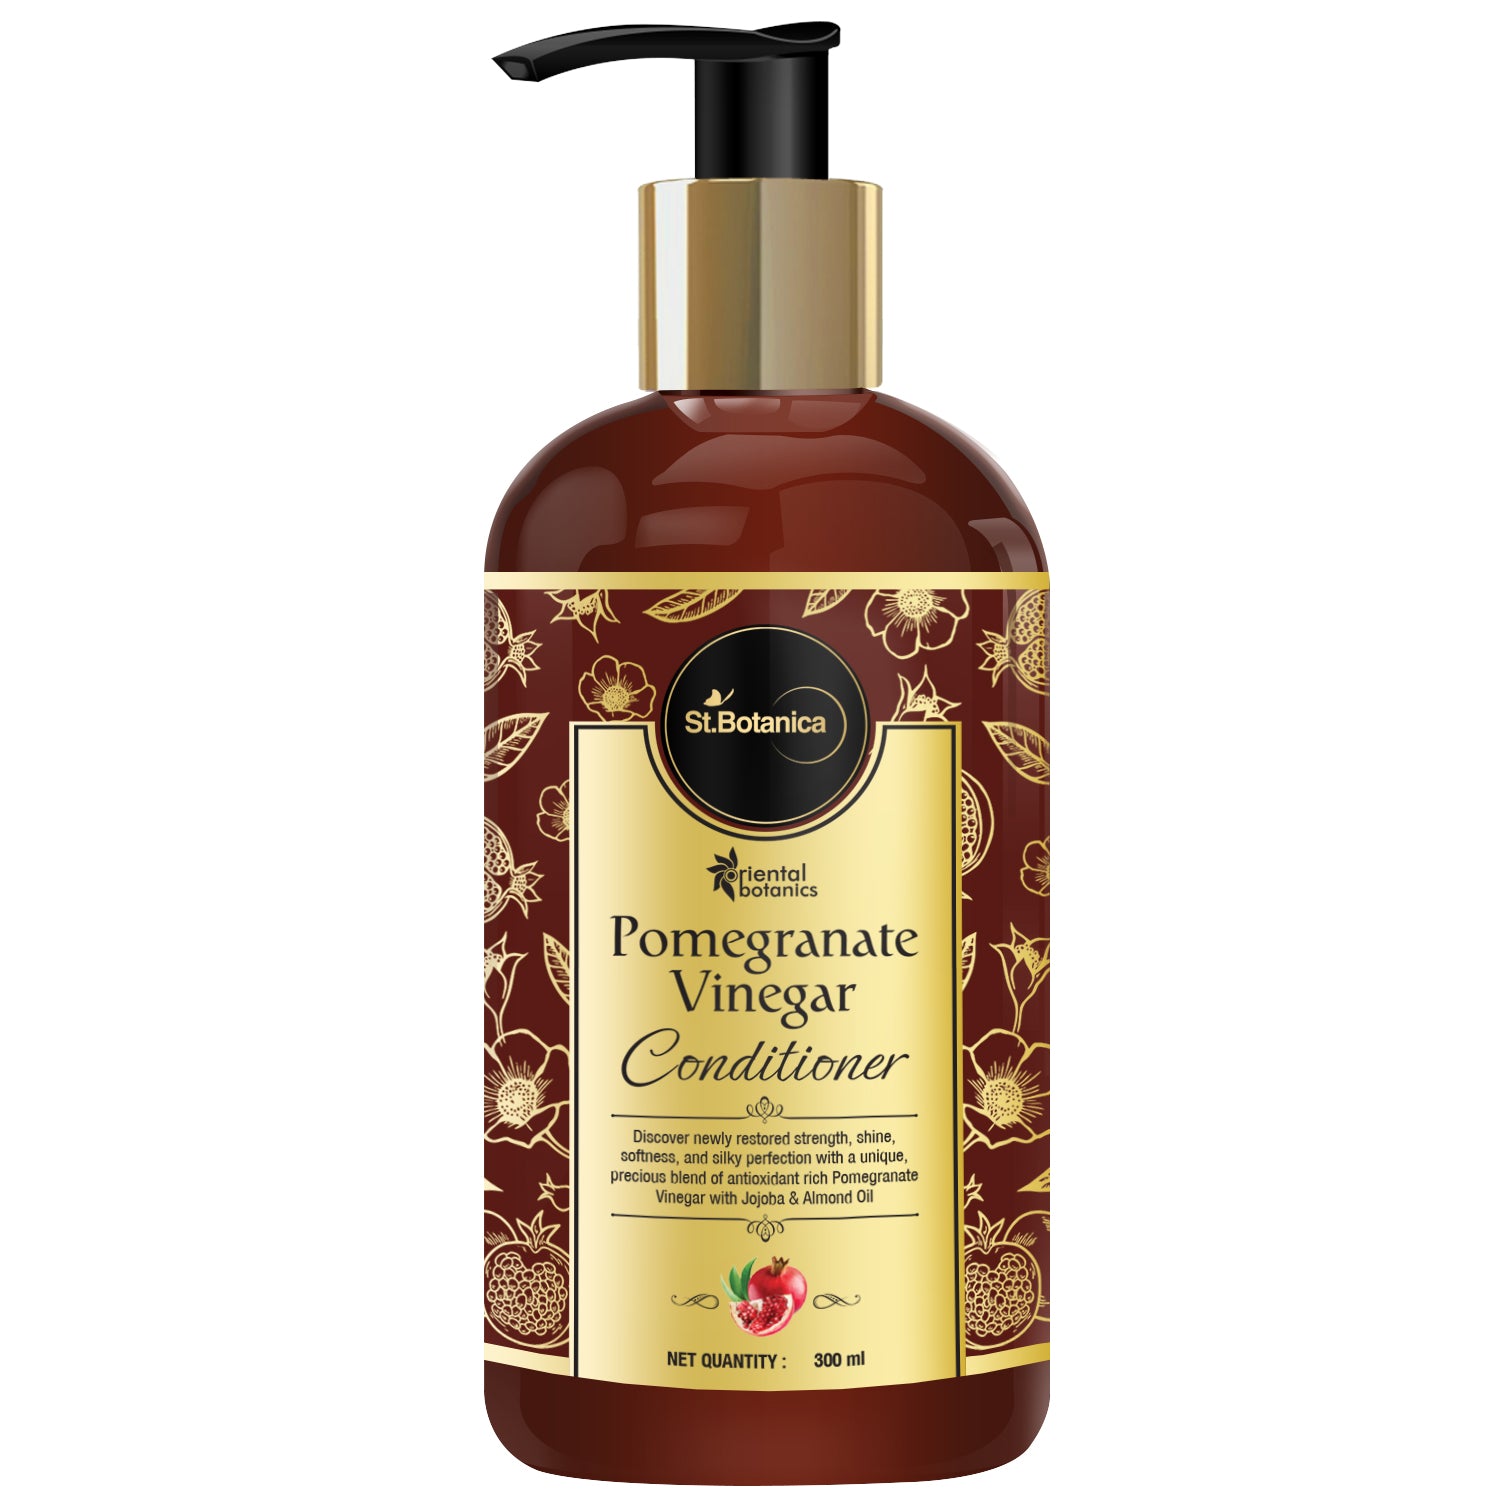 Oriental Botanics Pomegranate Vinegar Conditioner, With Golden Jojoba Oil, Almond, For Healthy, Strong Hair with Antioxidant Boost, 300 ml